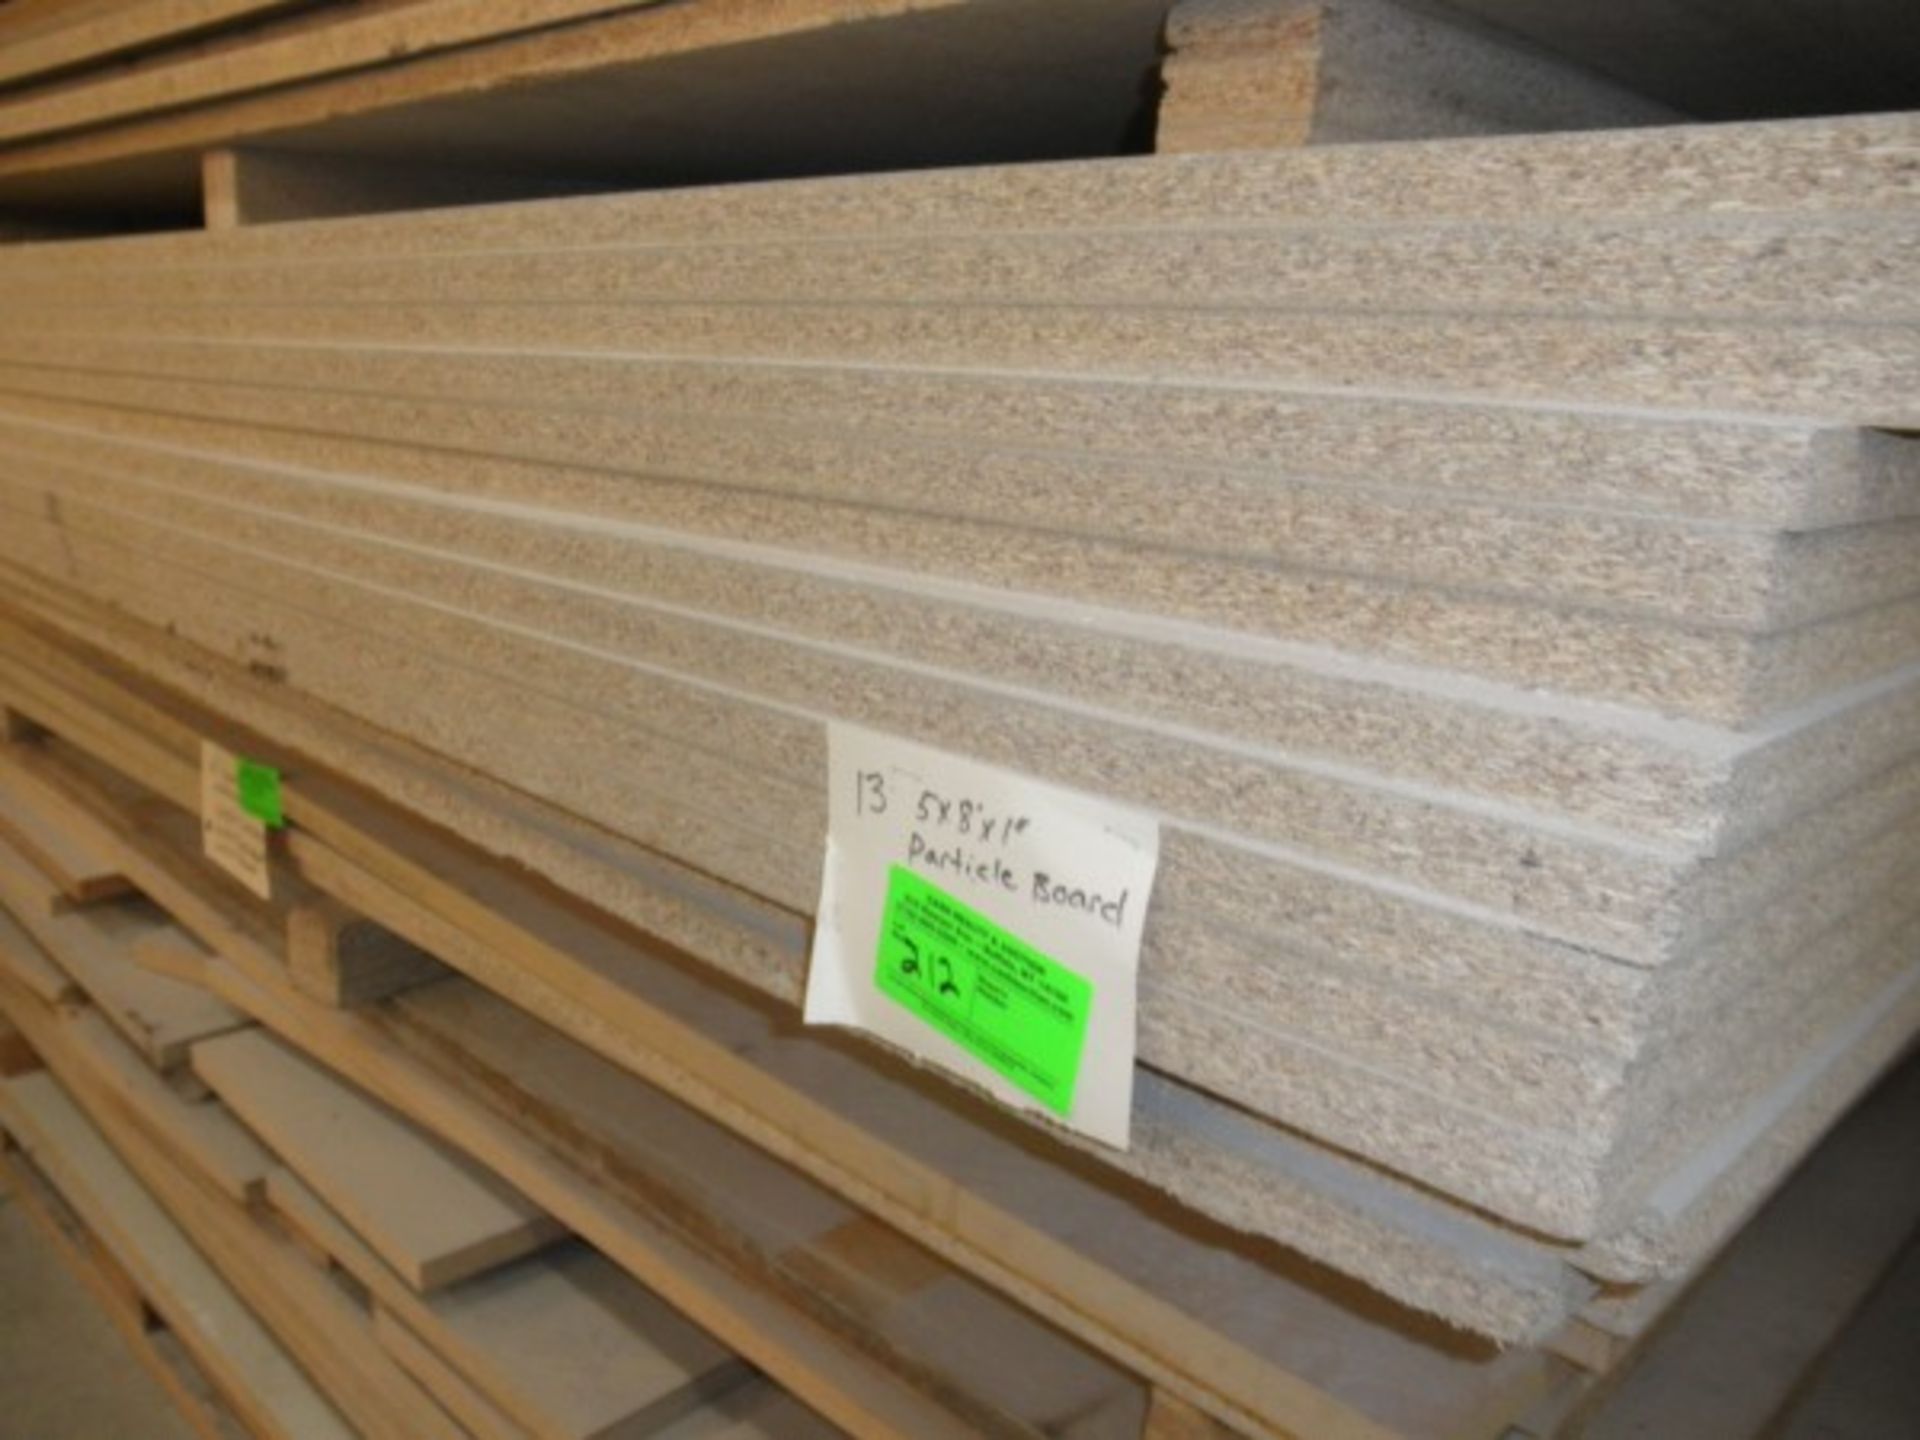 13 5X8X1" PARTICLE BOARD